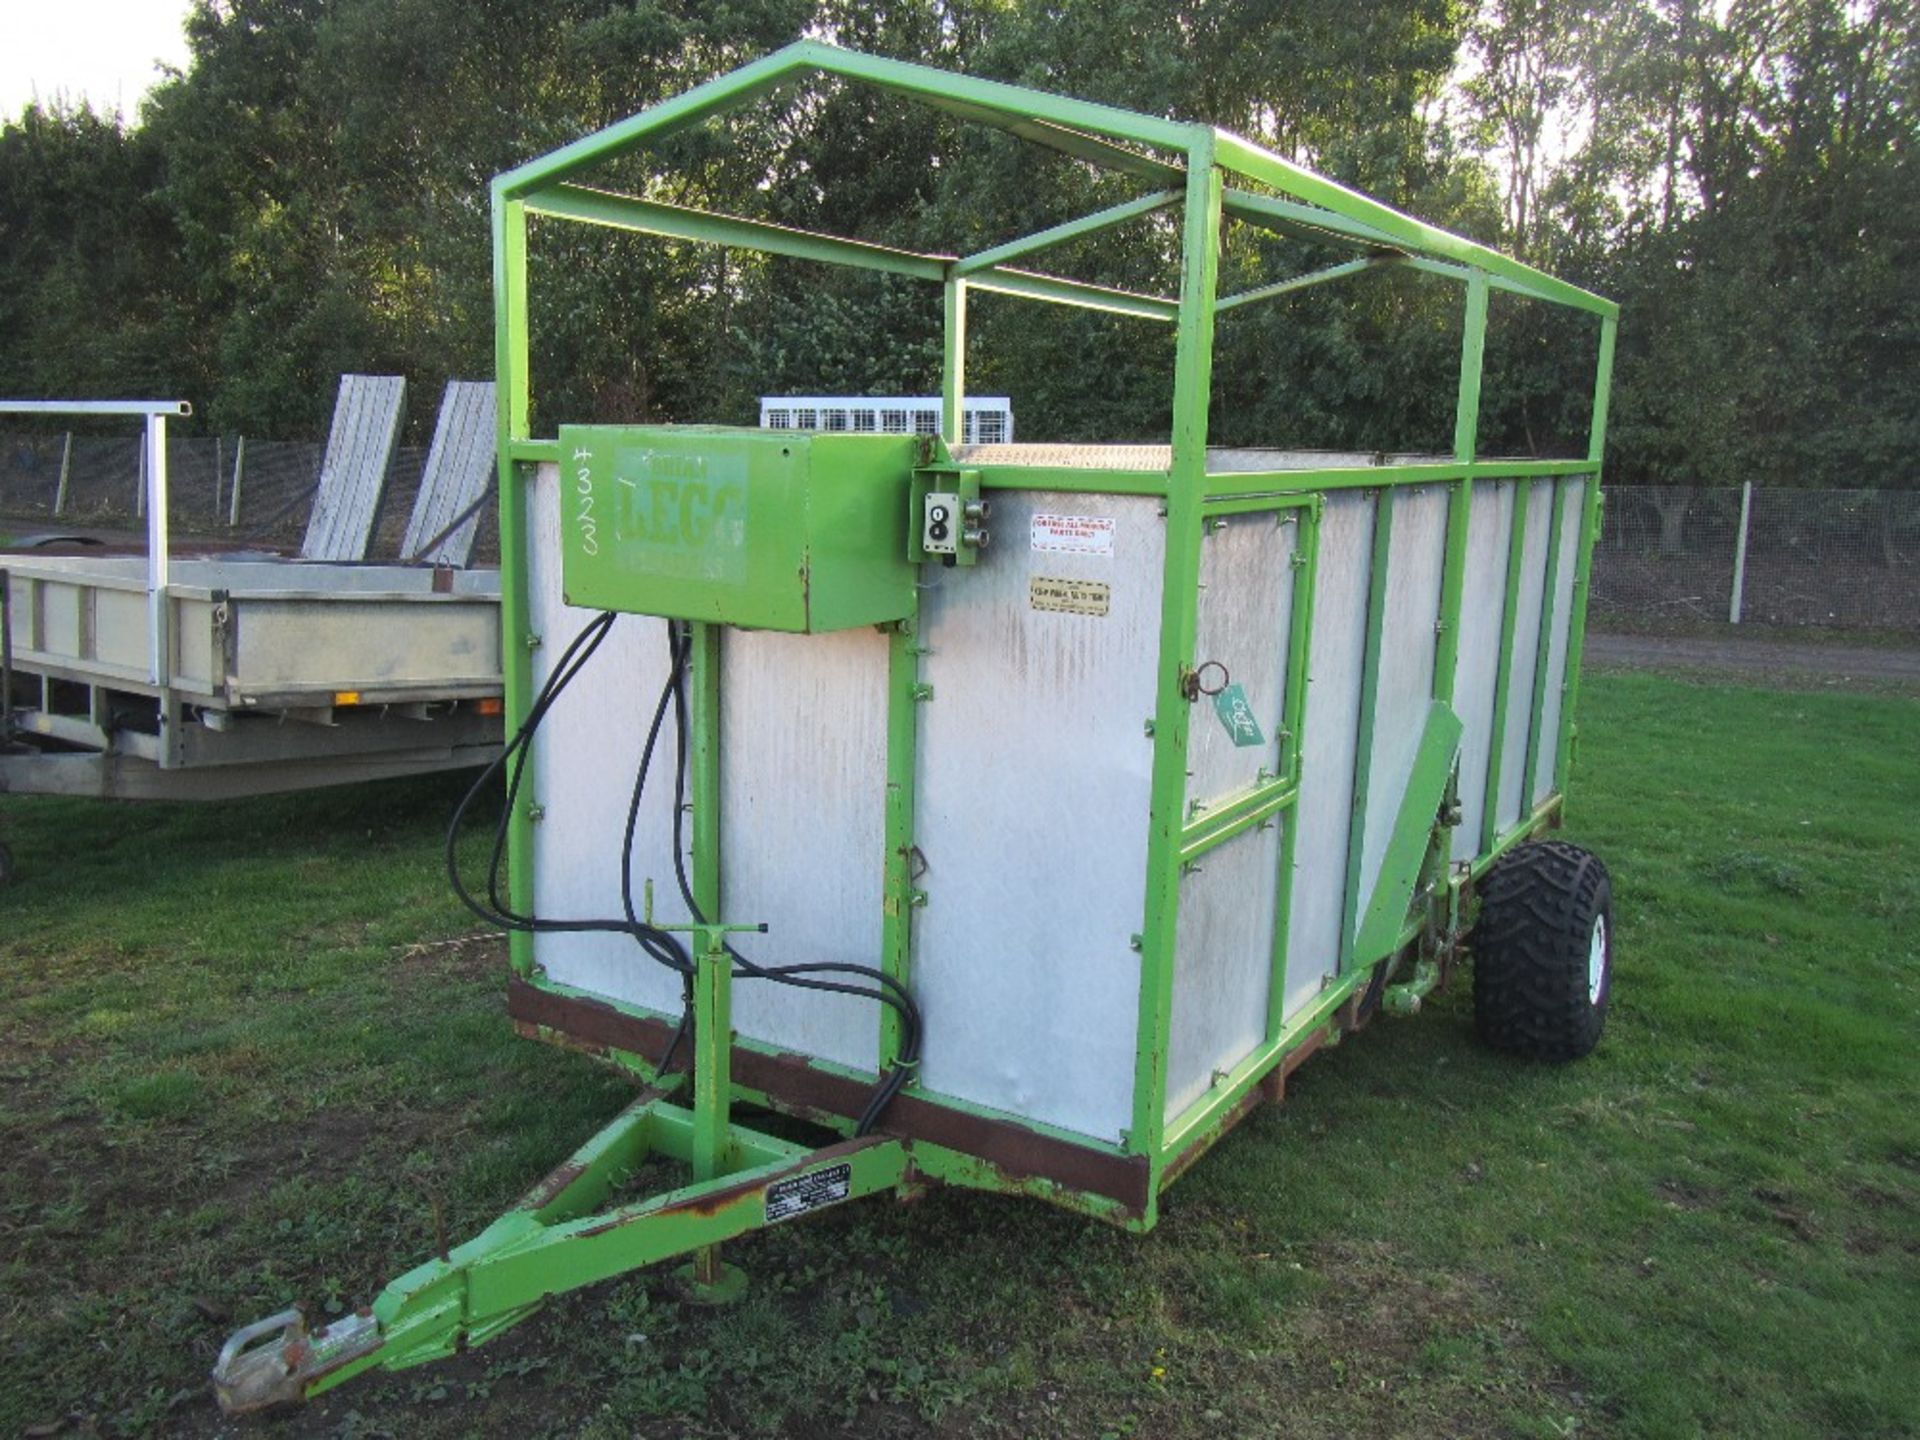 2006 Brian Legg Livestock Trailer with Hydro Electric Lift - Image 2 of 5